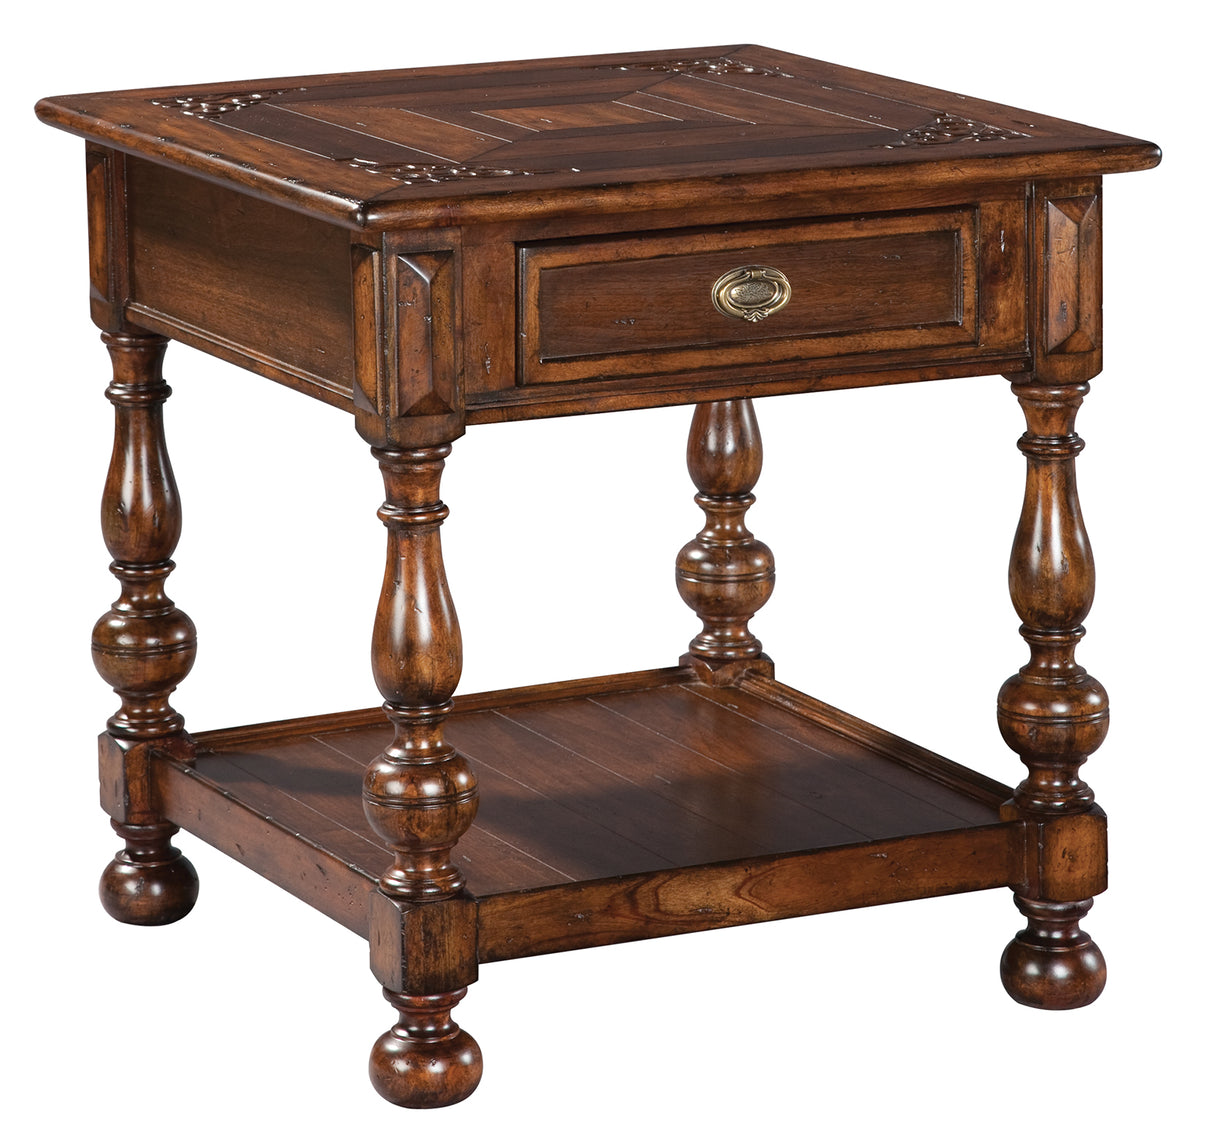 Hekman 11801 Accents 27in. x 27in. x 27in. End Table